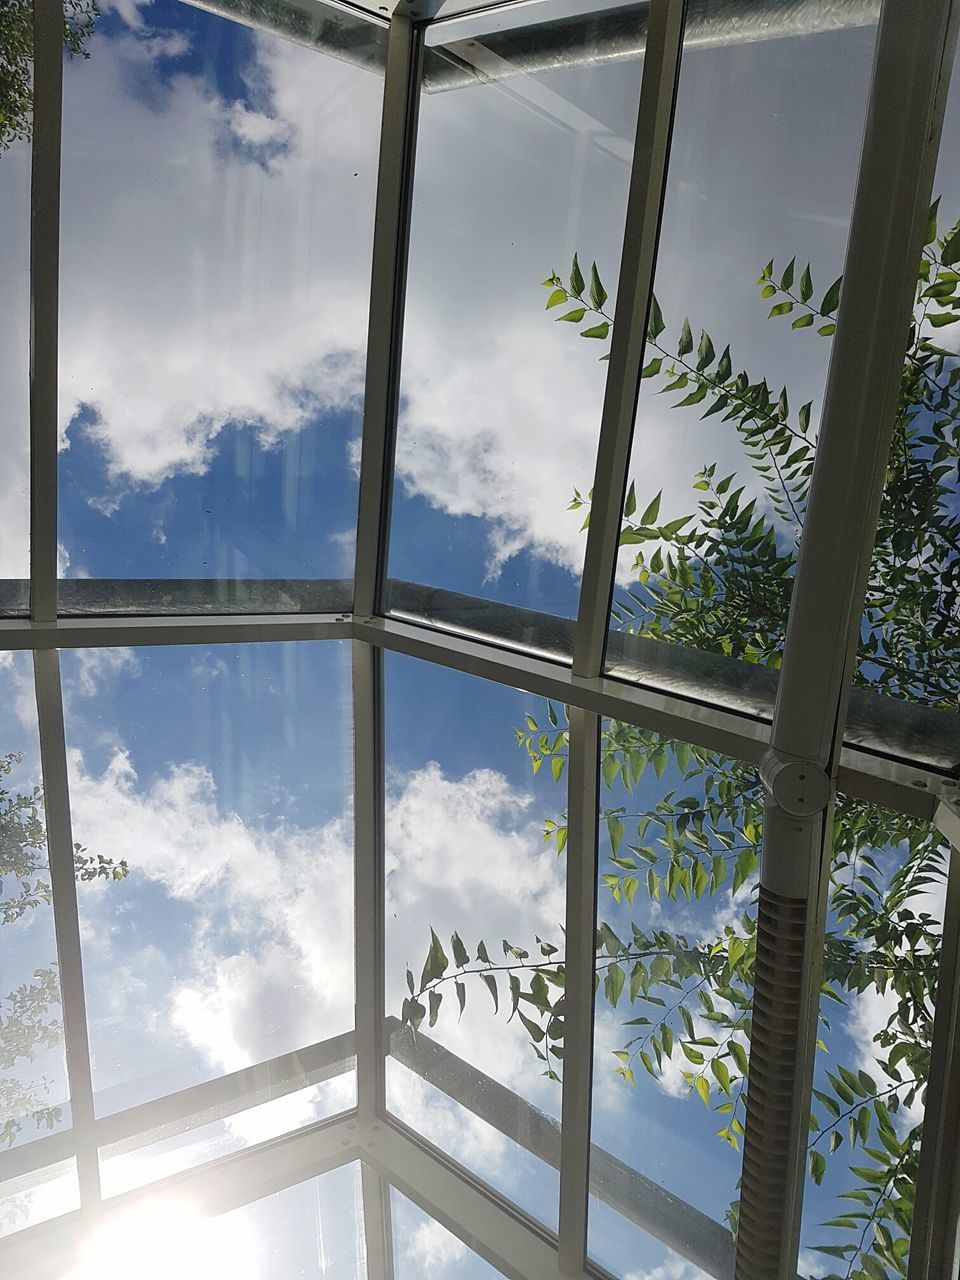 PANORAMIC VIEW OF TREES AGAINST SKY SEEN THROUGH GLASS